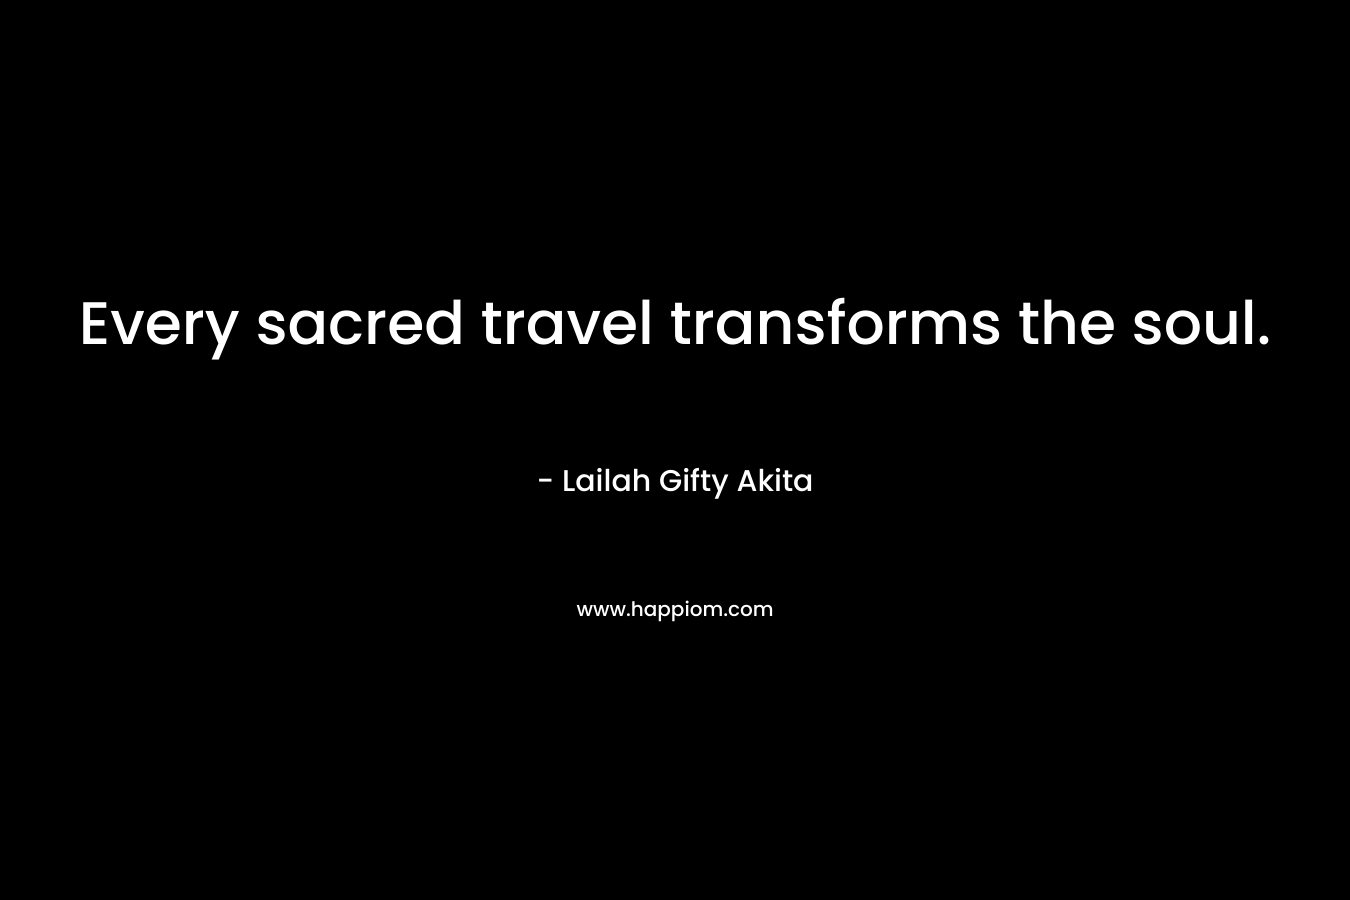 Every sacred travel transforms the soul.